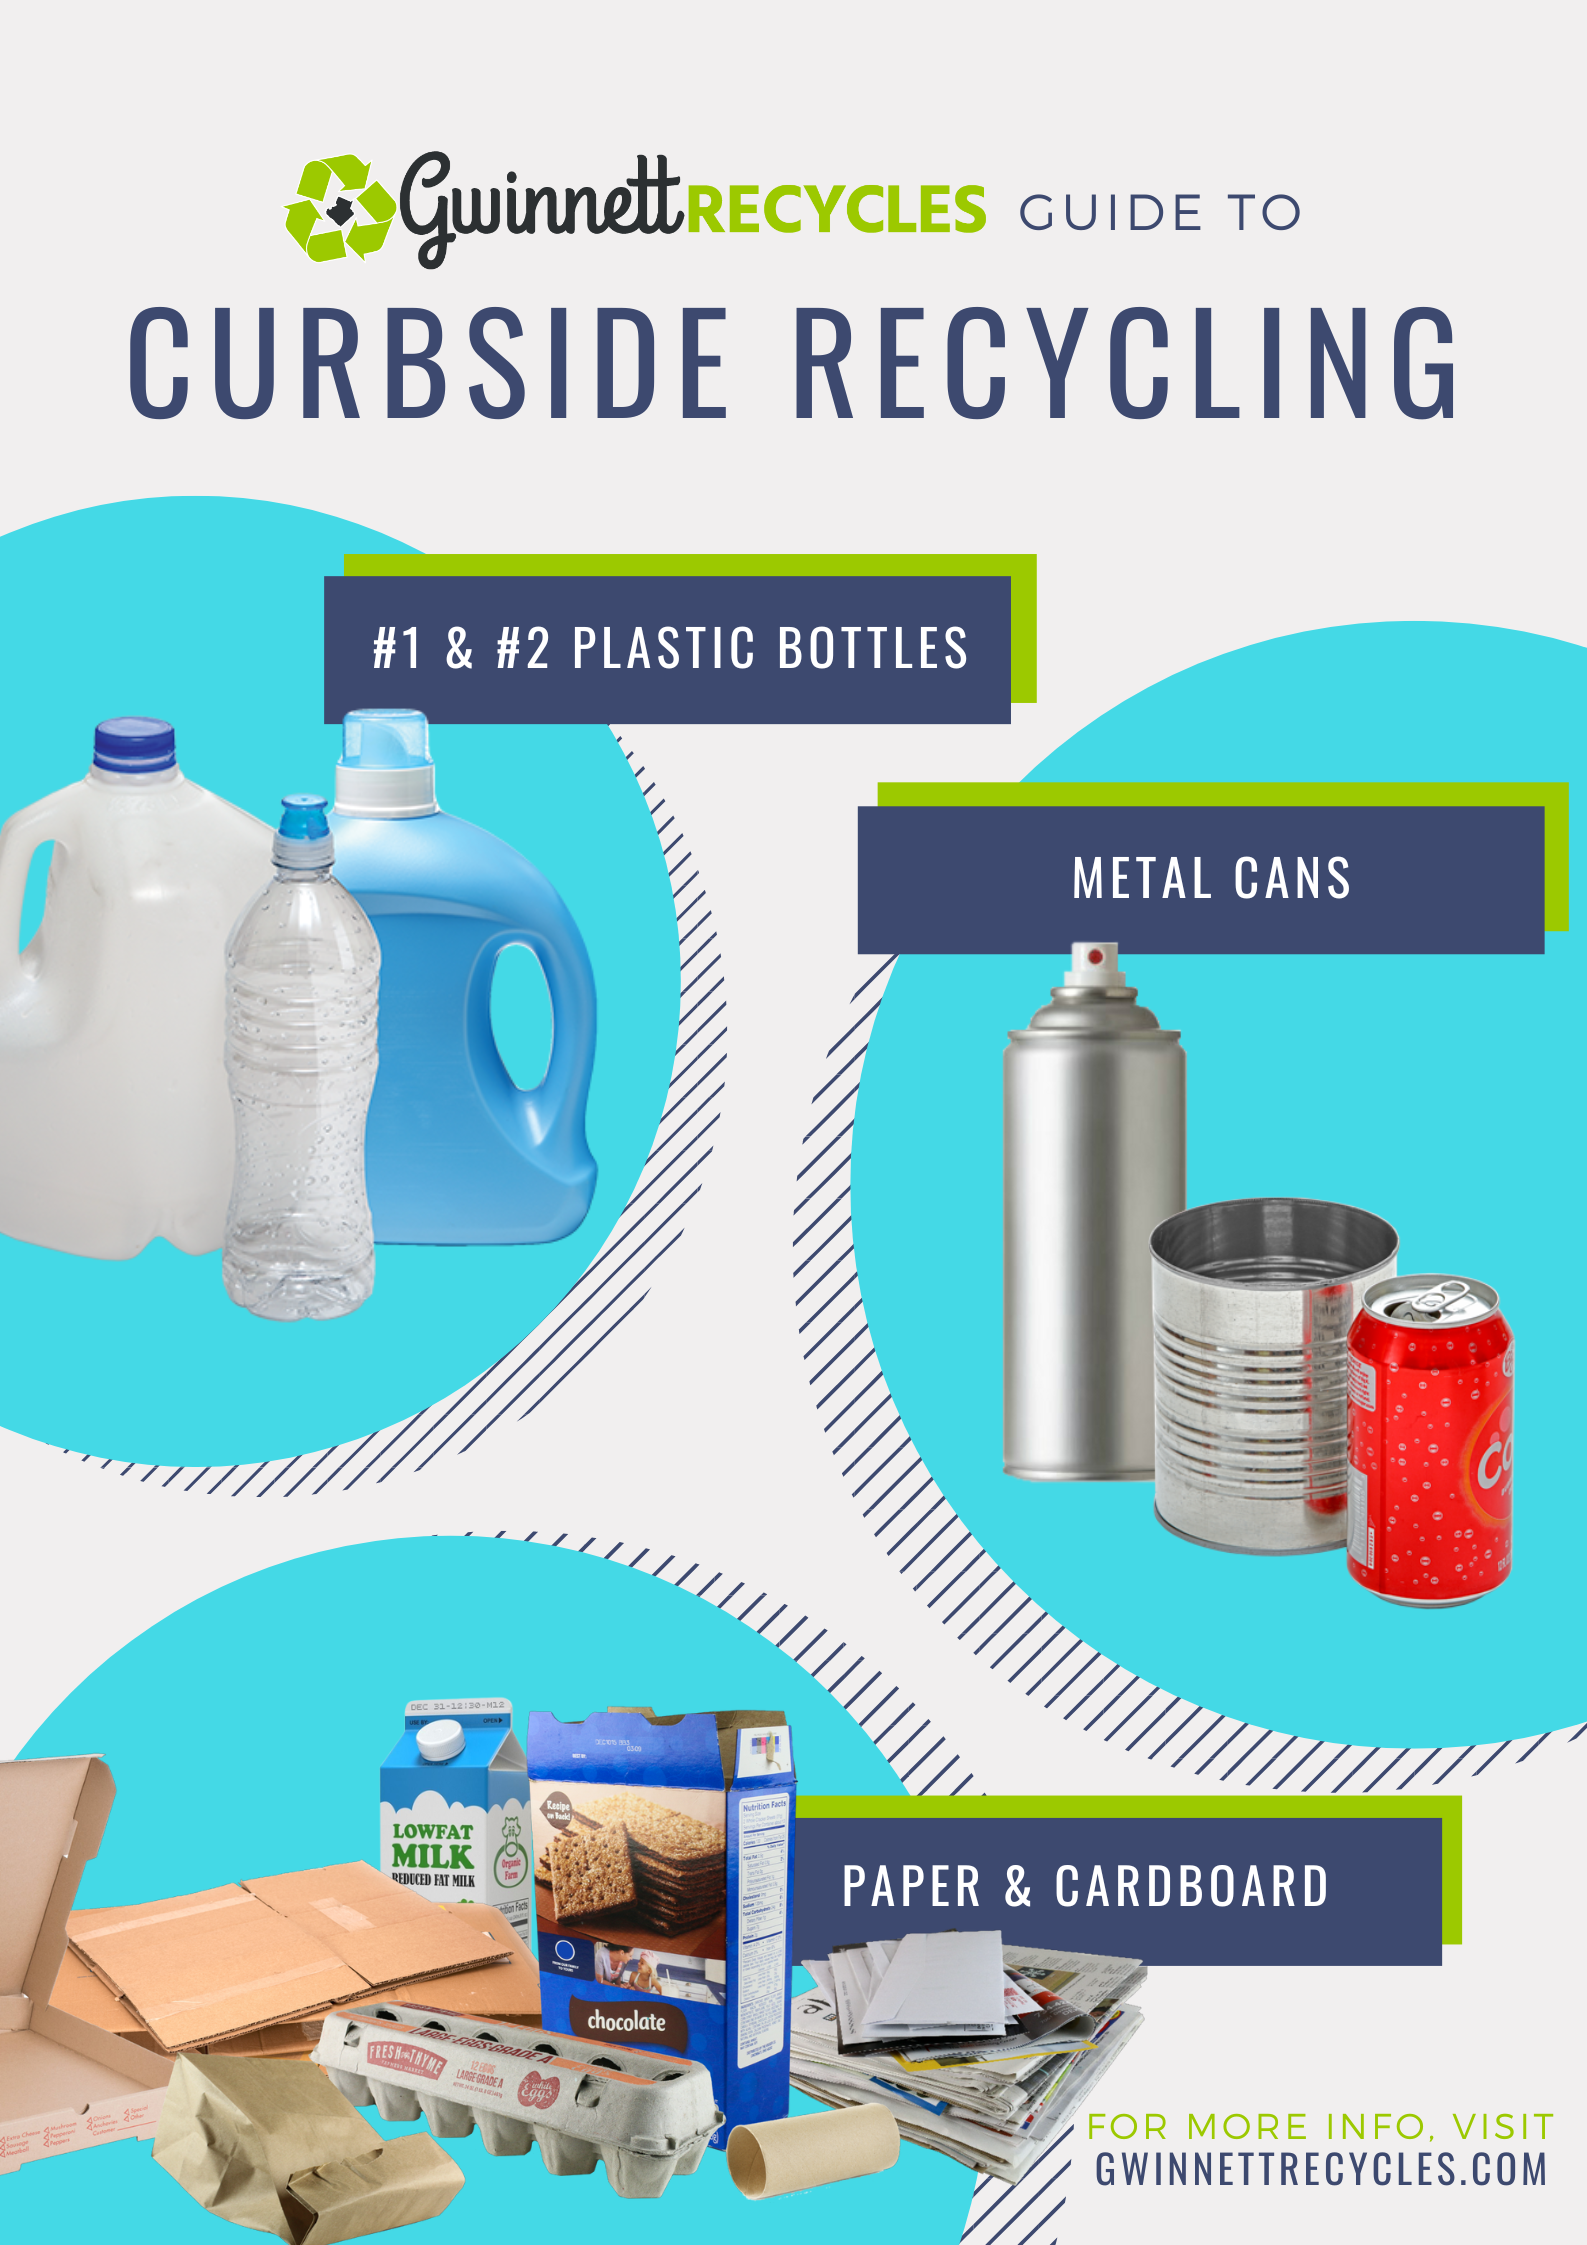 Plastic milk bottle recycling and disposal